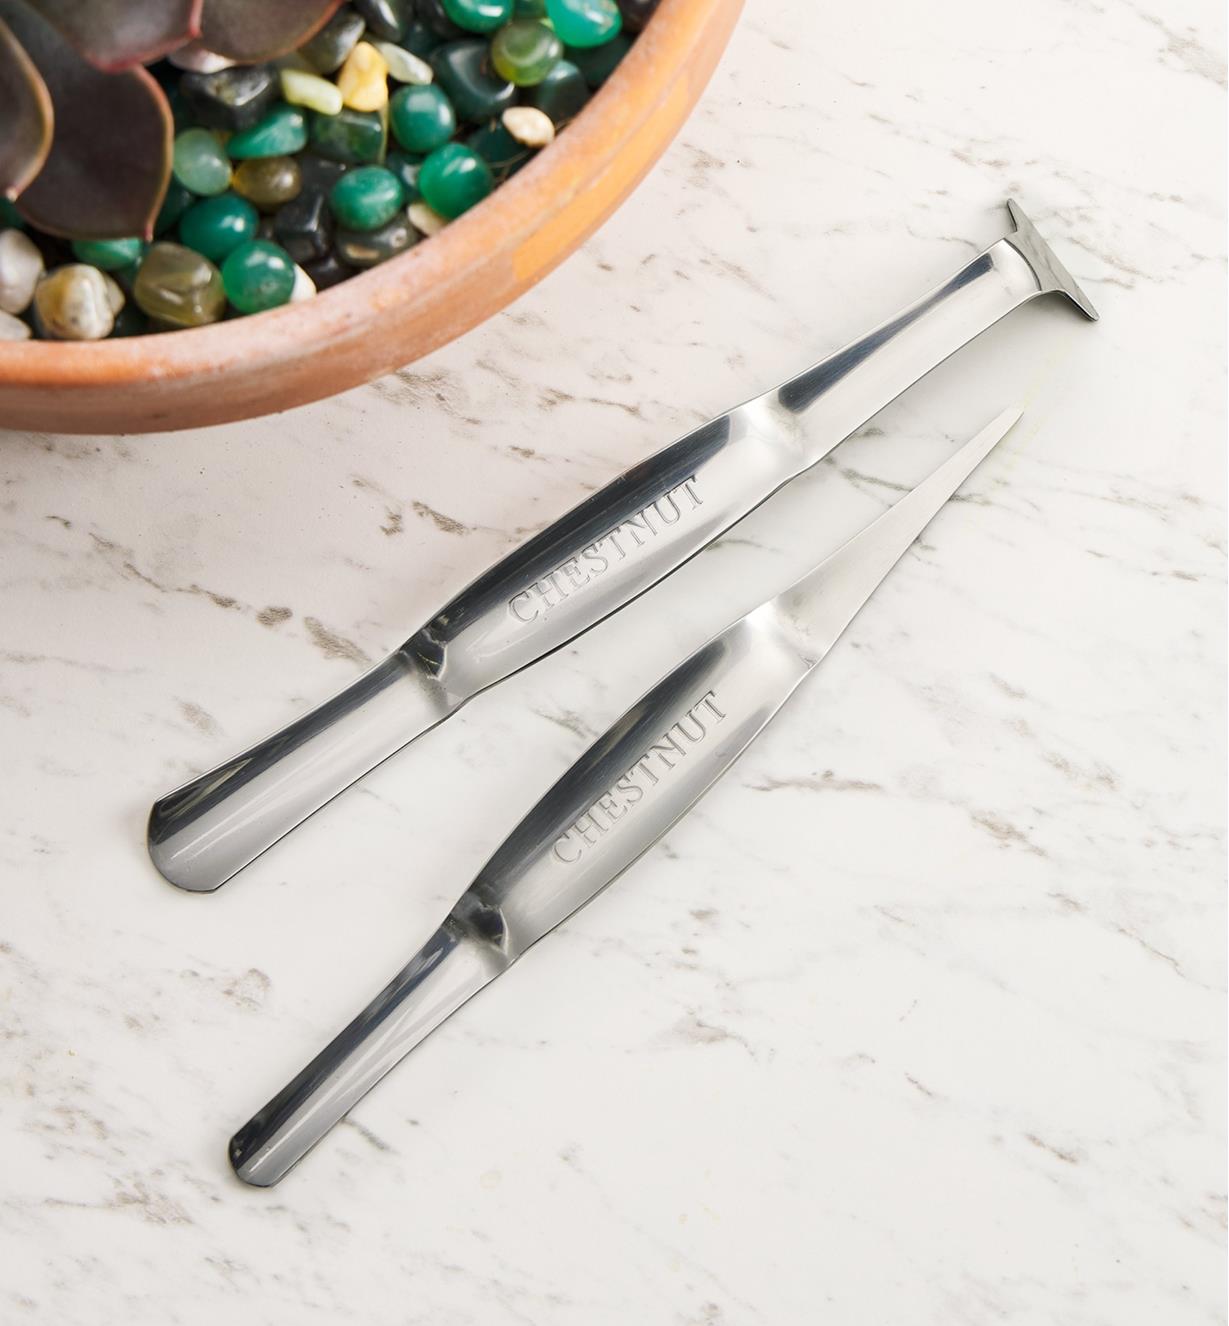 Two stainless-steel potting tools placed on a countertop beside a potted houseplant